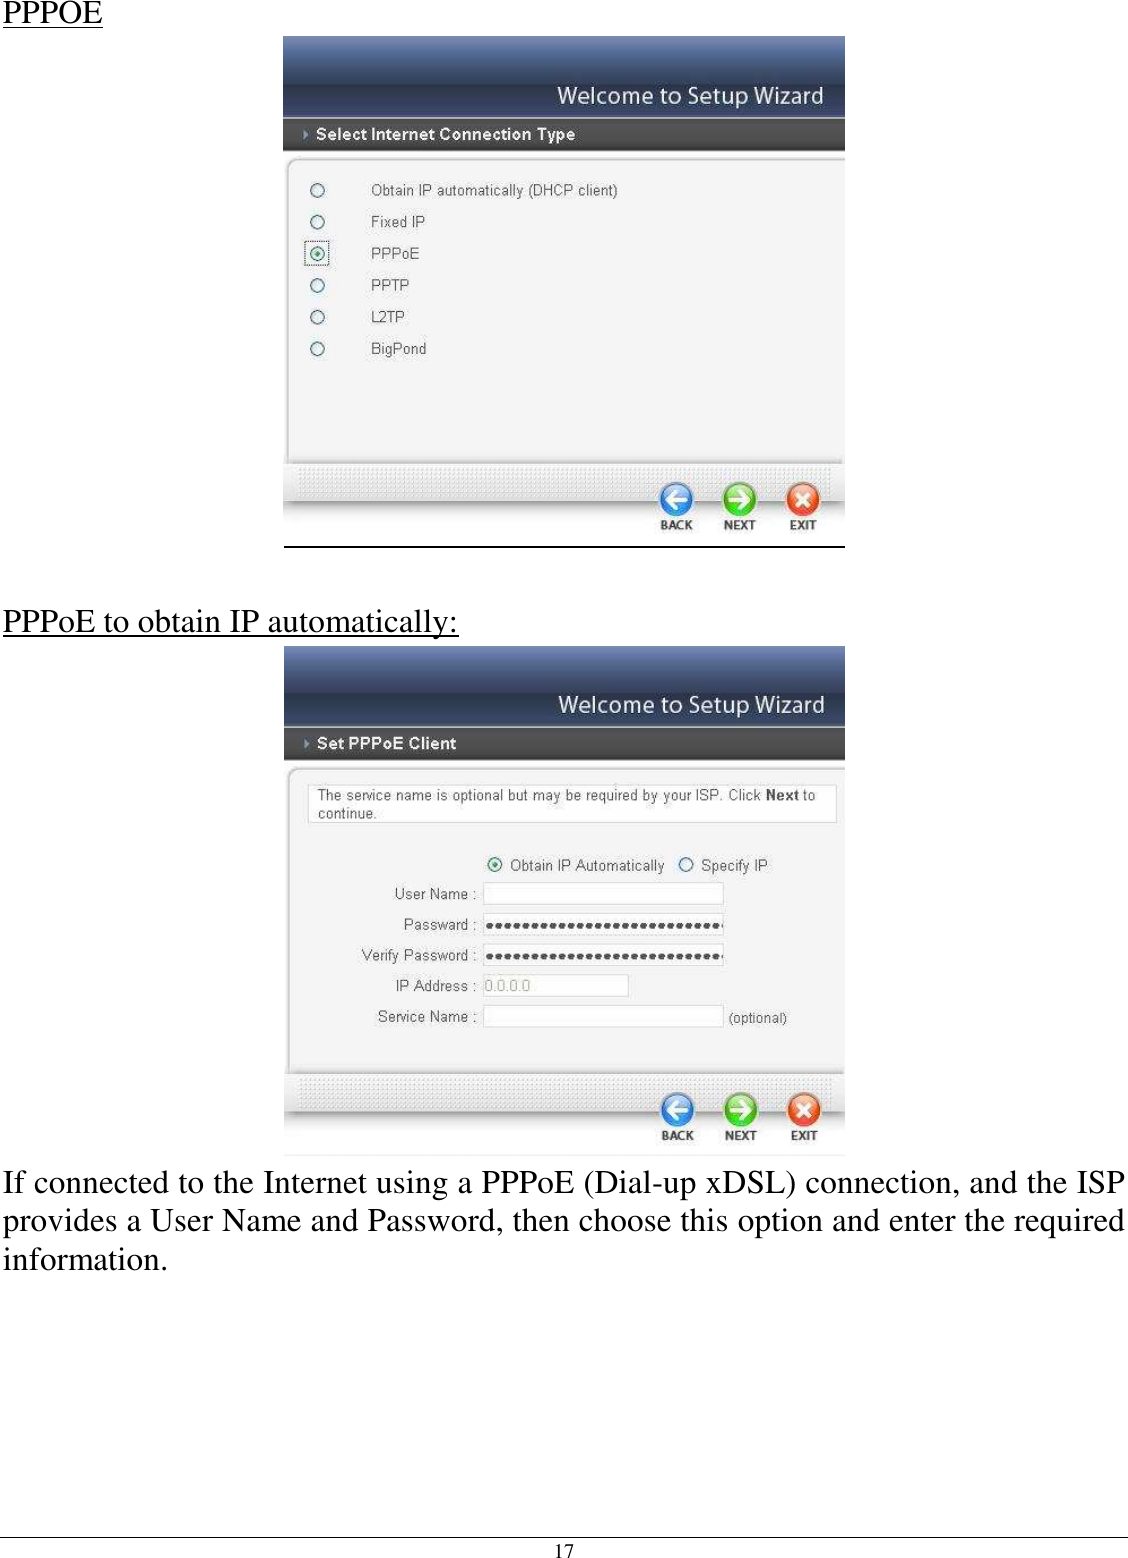 17 PPPOE   PPPoE to obtain IP automatically:  If connected to the Internet using a PPPoE (Dial-up xDSL) connection, and the ISP provides a User Name and Password, then choose this option and enter the required information.  